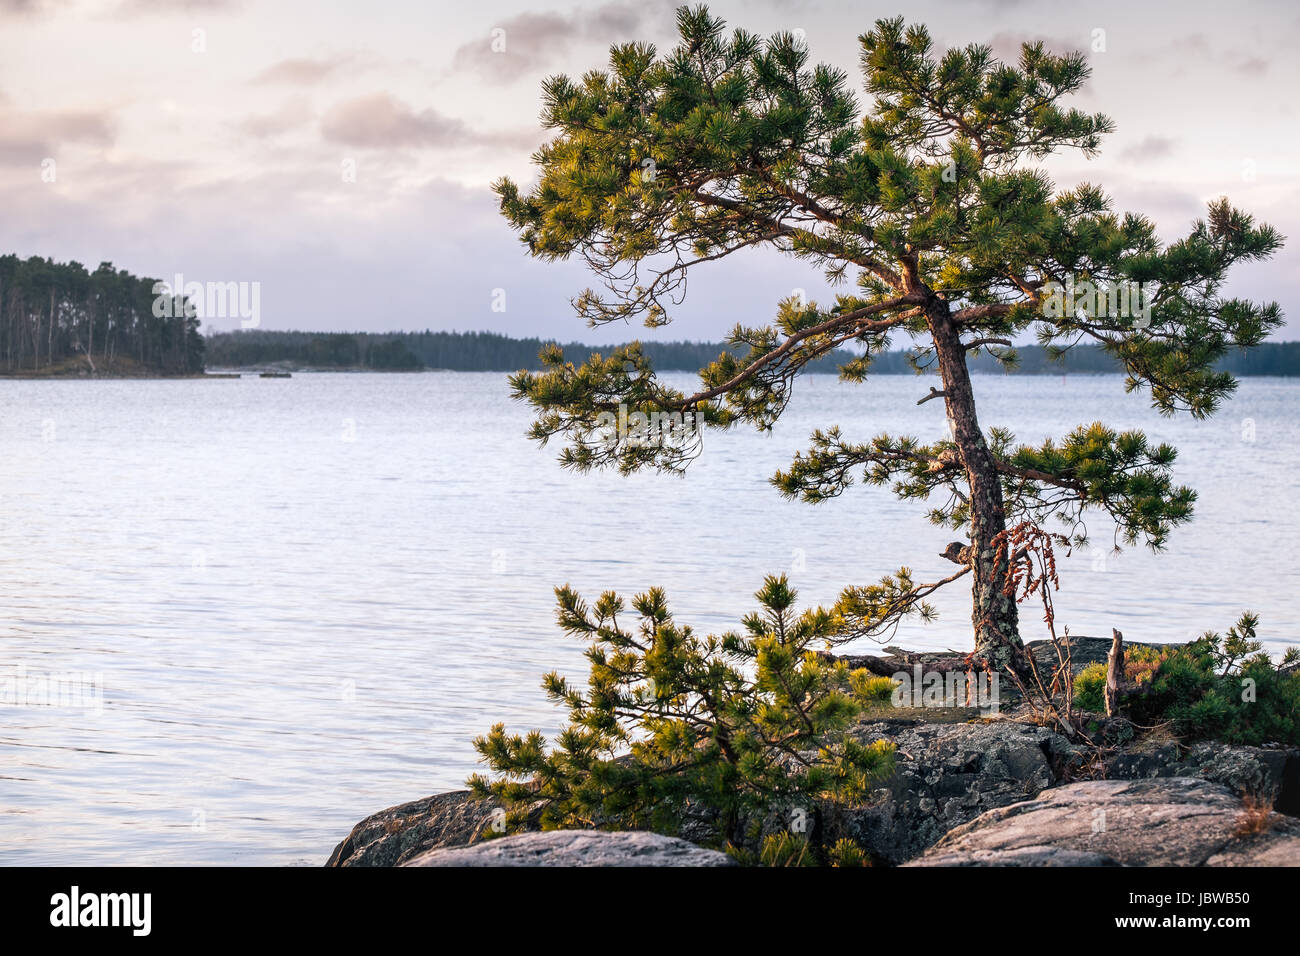 Landscape with nice morning light and pine trees in coastline, Finland Stock Photo